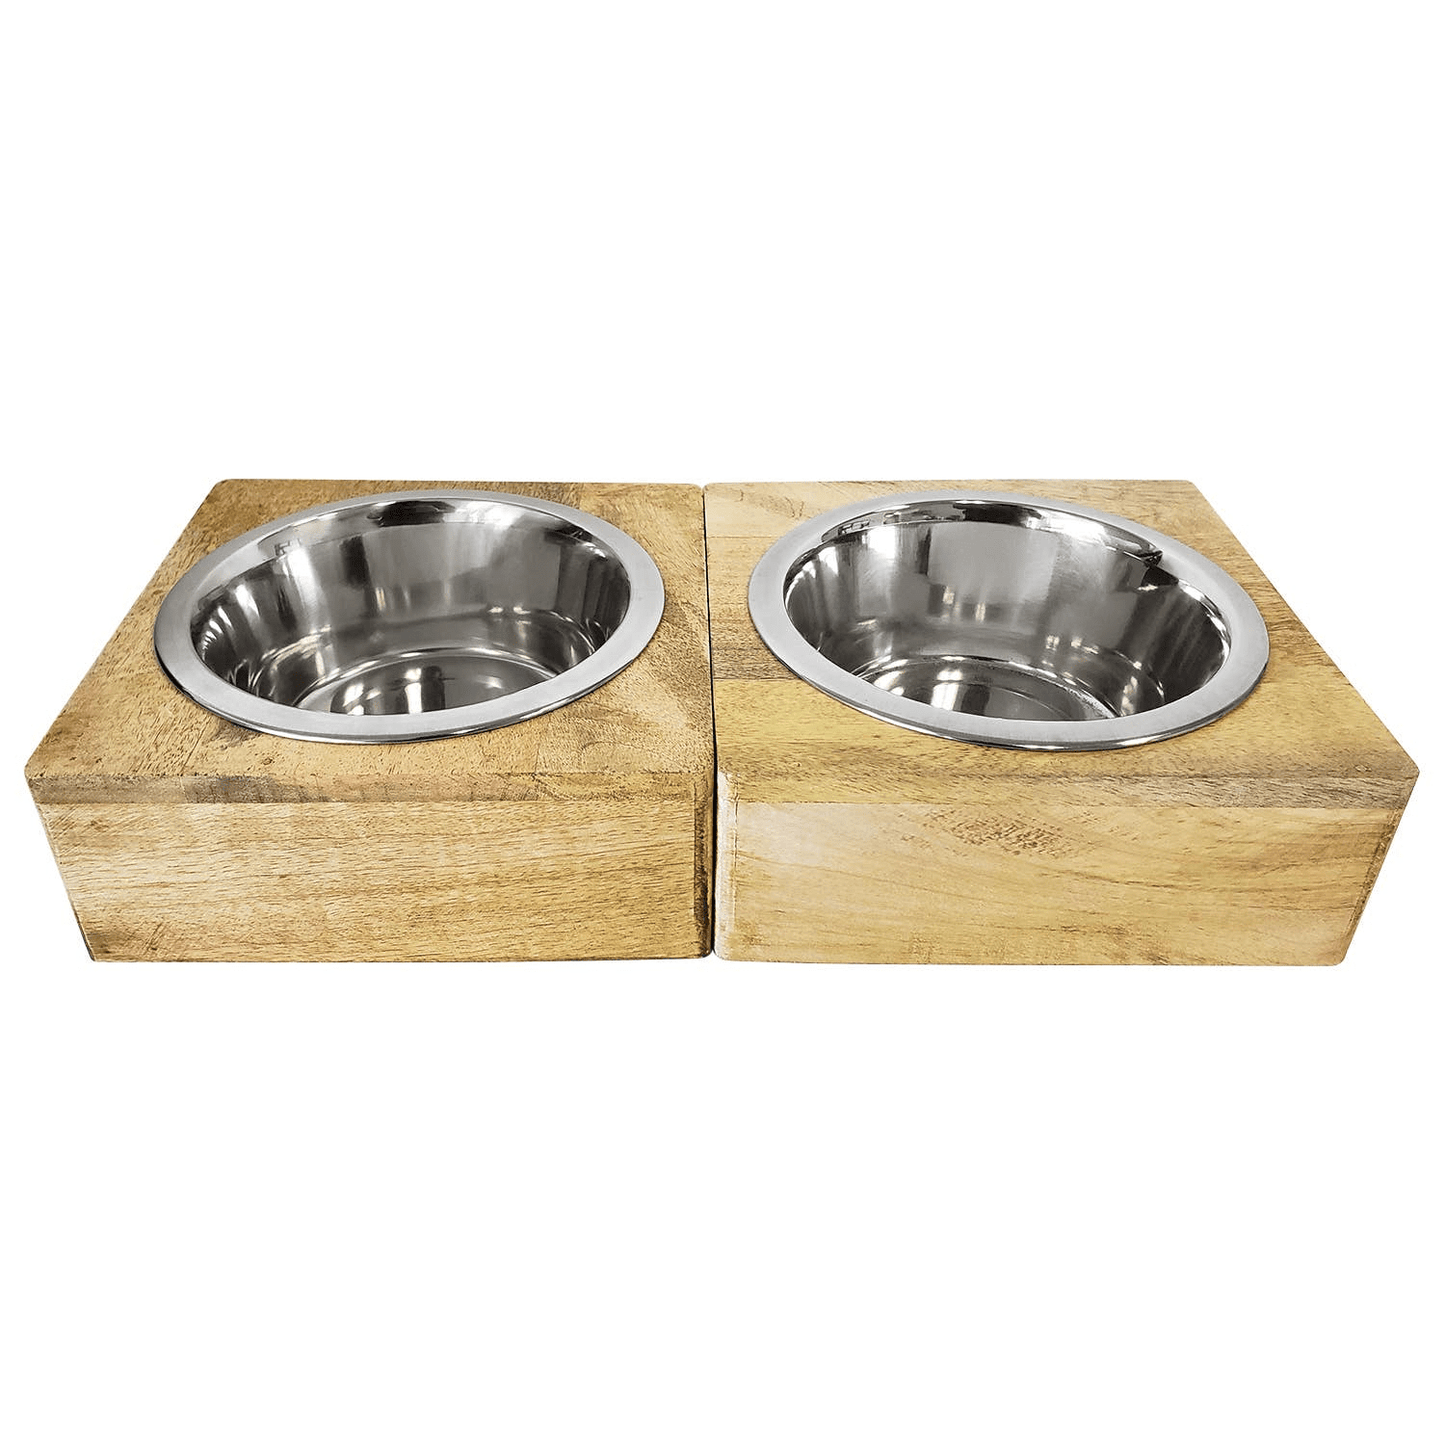 Dog and Pet Stuff Default Stainless Steel Dog Bowl with Square Mango Wood Holder